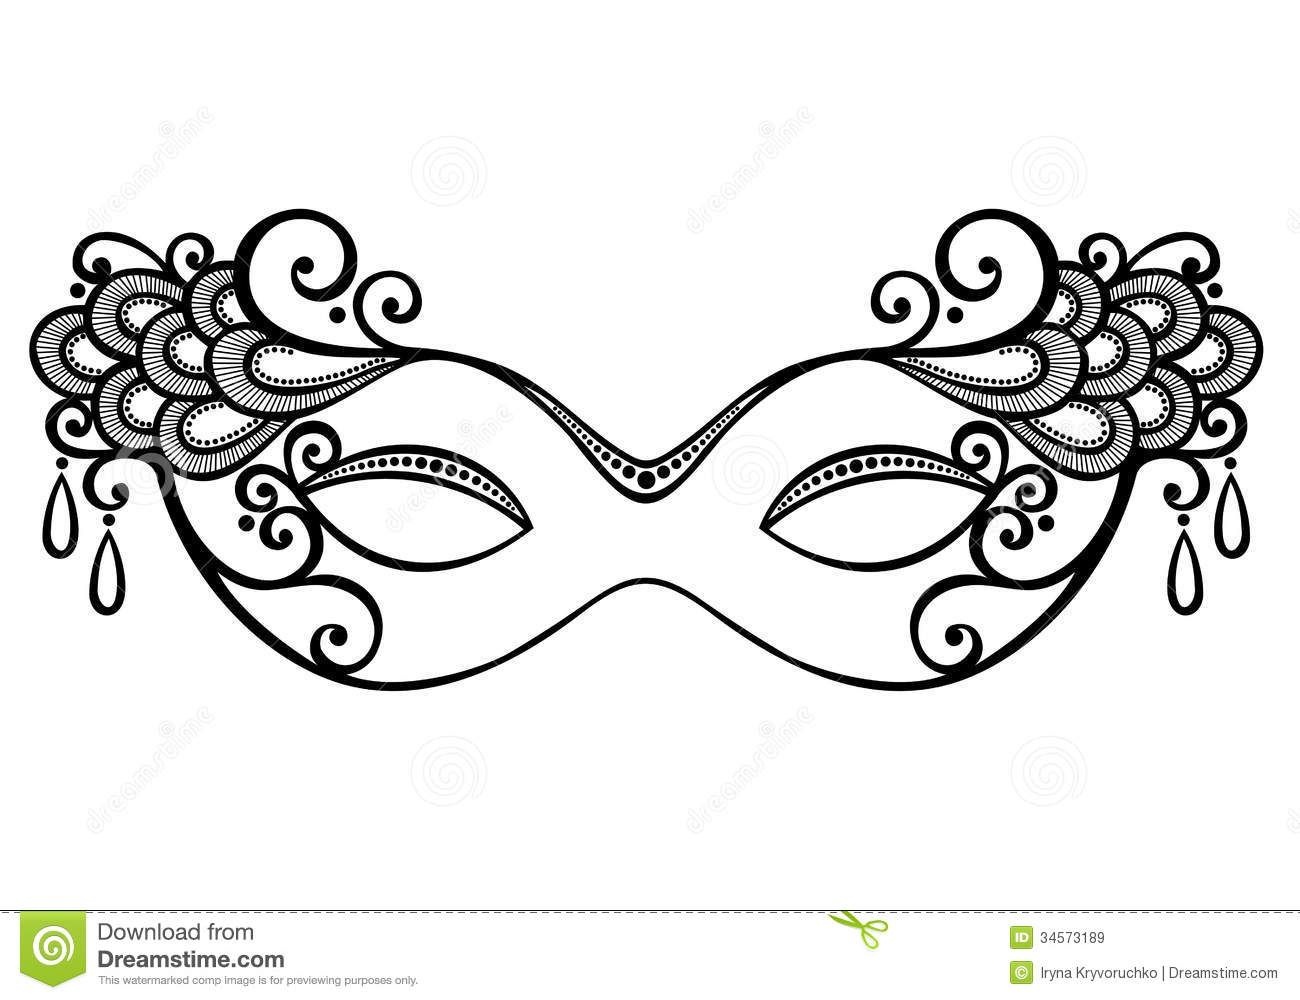 Masquerade Mask - Download From Over 44 Million High Quality Stock - Free Printable Masquerade Masks